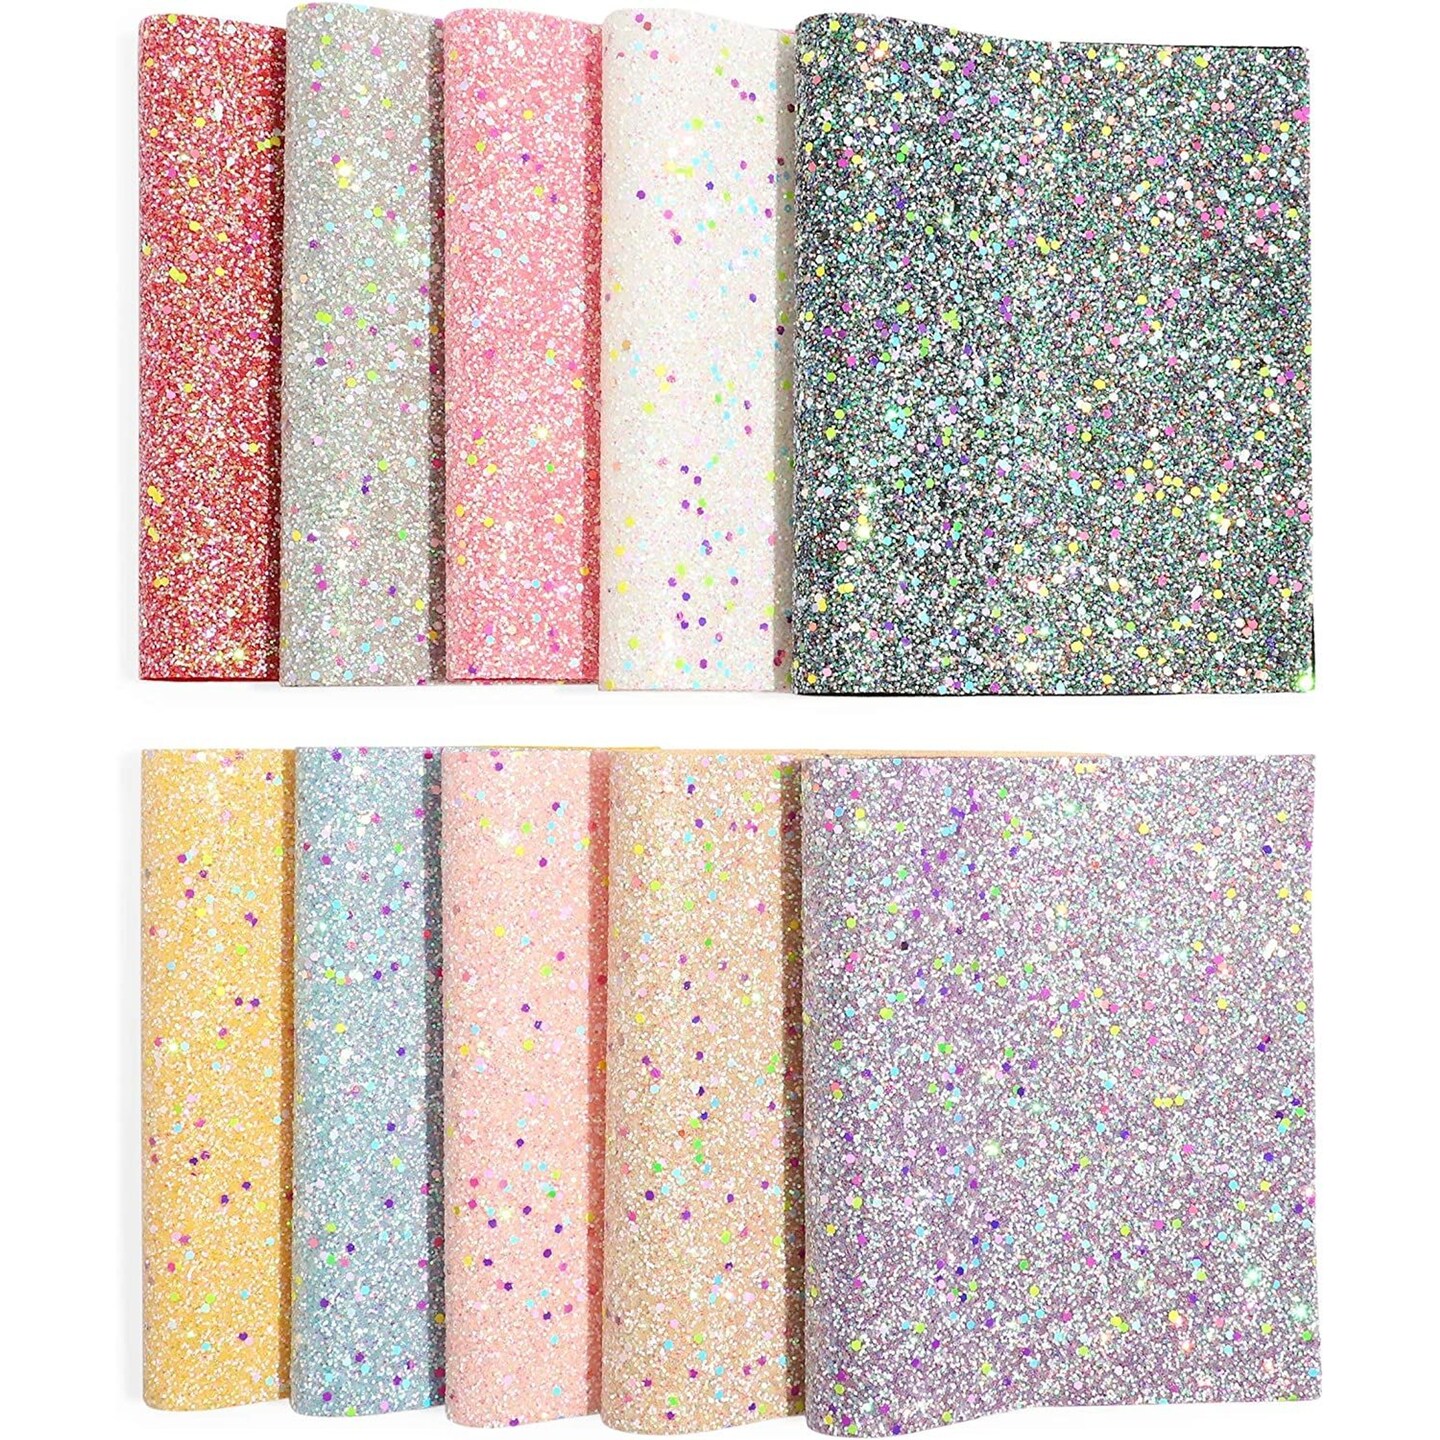 Faux Leather Sheet for Crafts, Glow in The Dark Glitter (10 Pack)